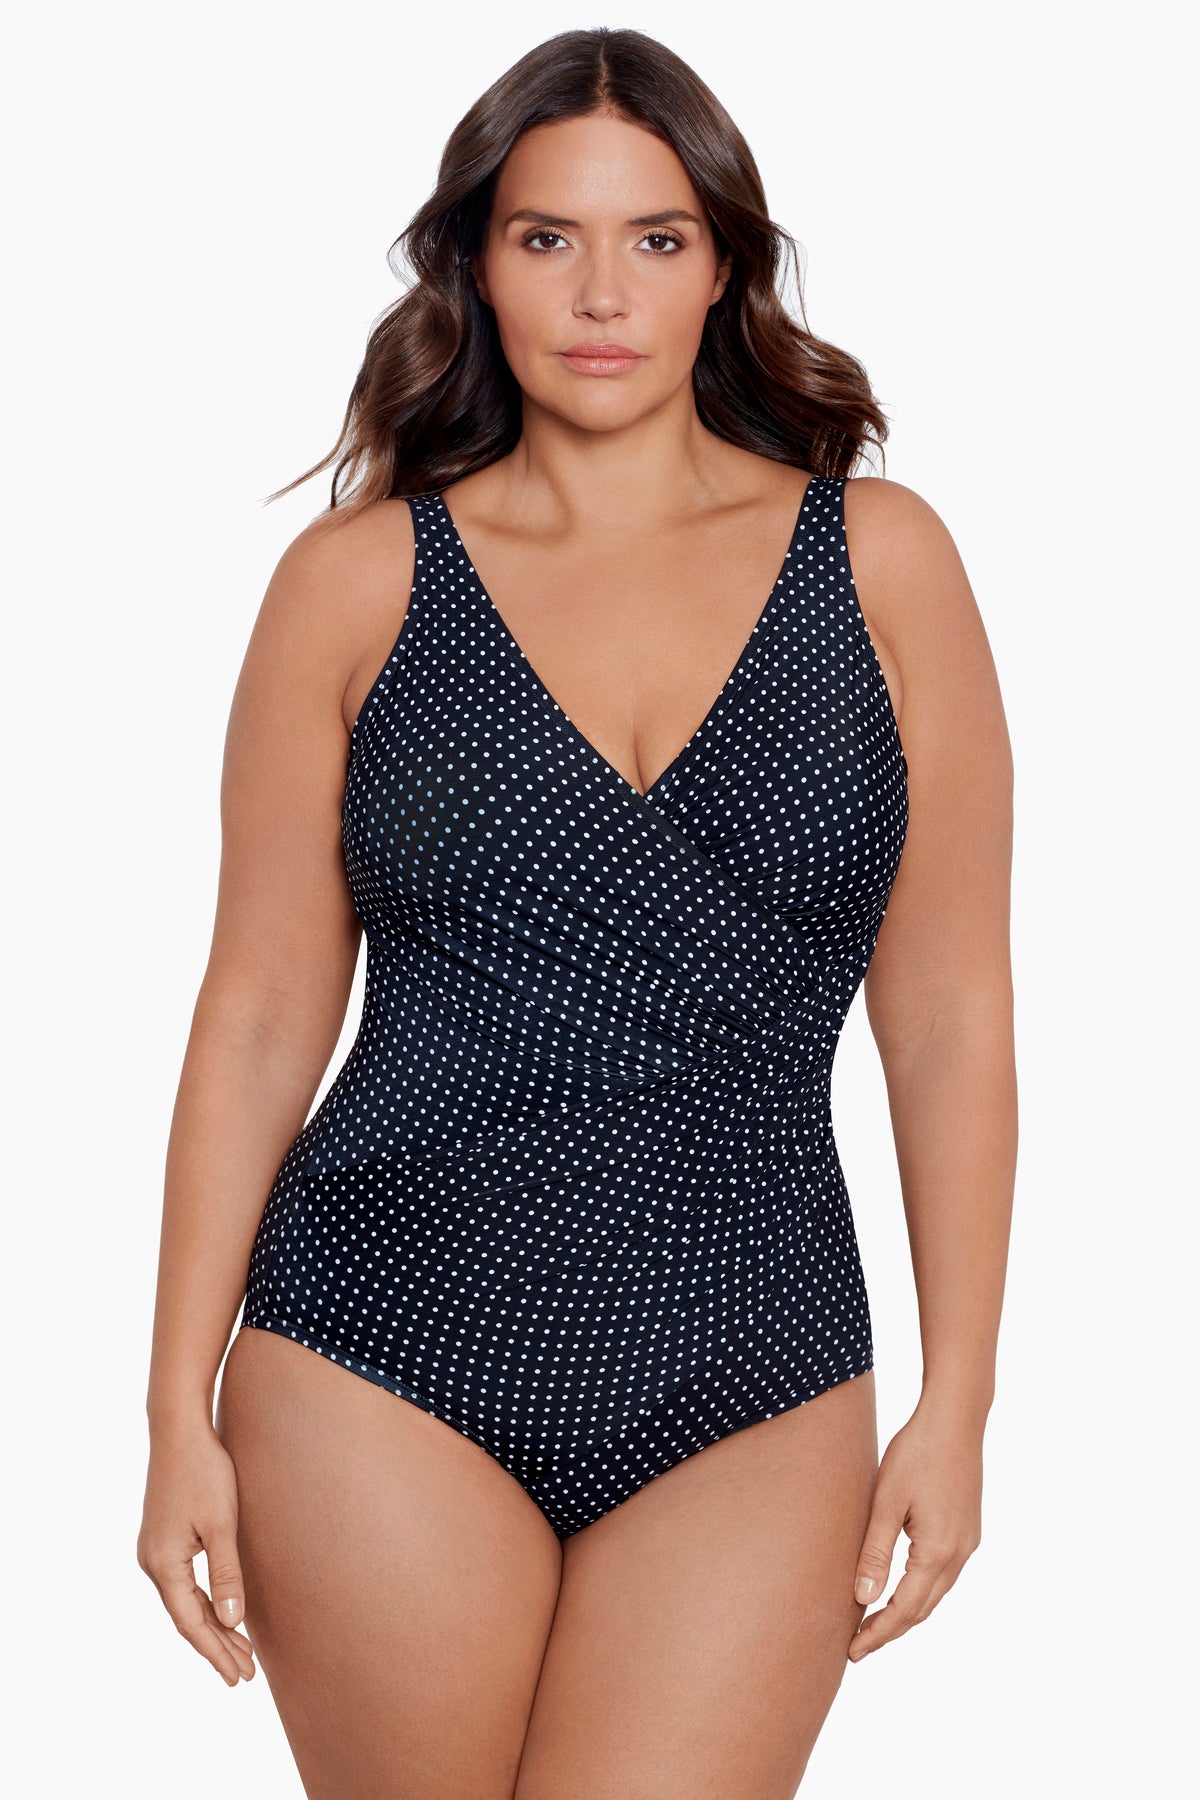 Inadays Plus Size One Piece Bathing Suit for Women Sexy Tummy